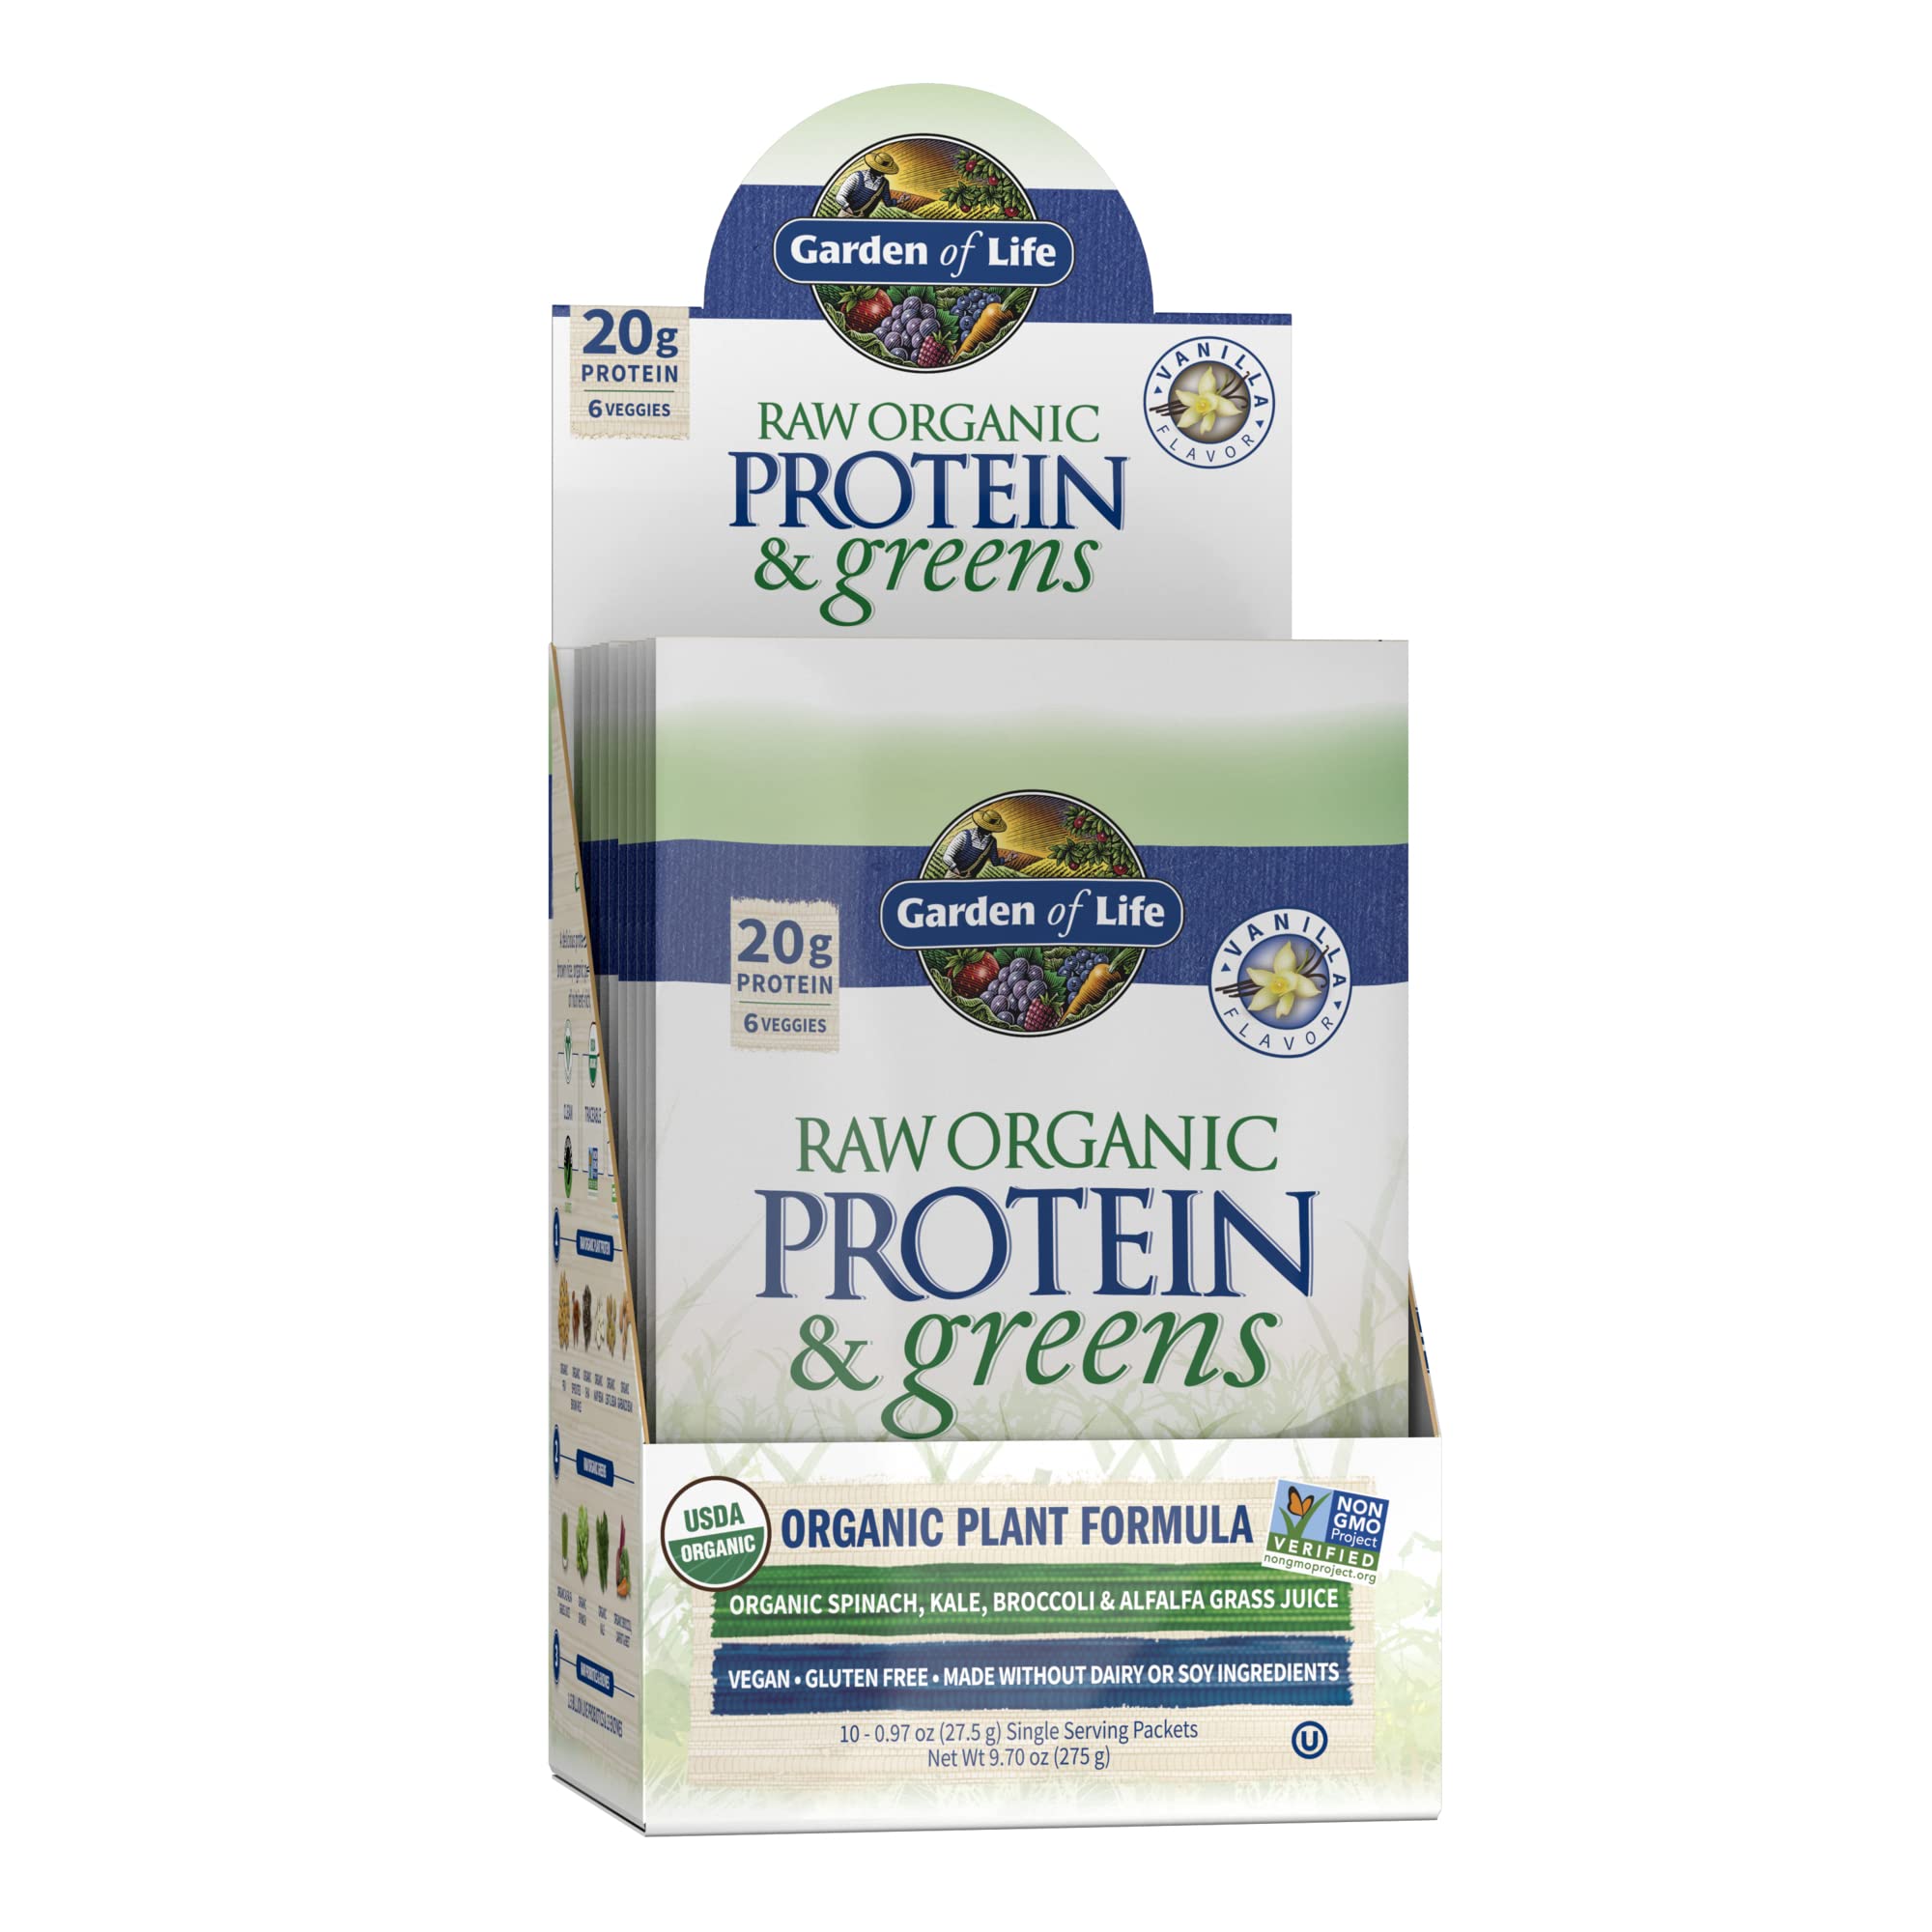 Garden of Life Raw Organic Protein & Greens Vanilla - Vegan Protein Powder for Women and Men, Plant and Pea Proteins, Greens & Probiotics - Gluten Free Low Carb Shake Made Without Dairy, 10ct Tray